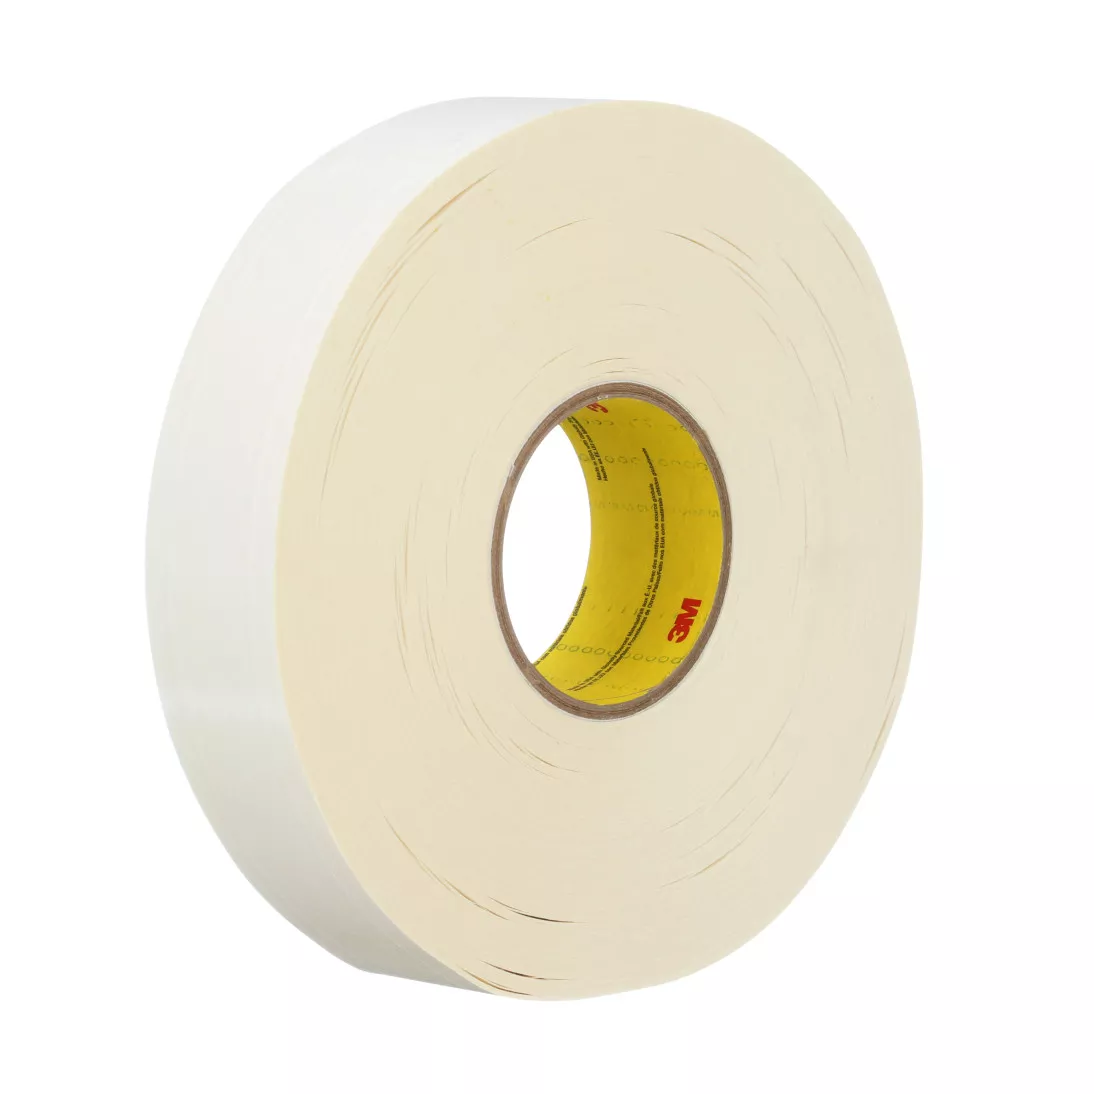 3M™ Repulpable Heavy Duty Double Coated Tape R3287, White, 72 mm x 55 m,
5 mil, 12 rolls per case